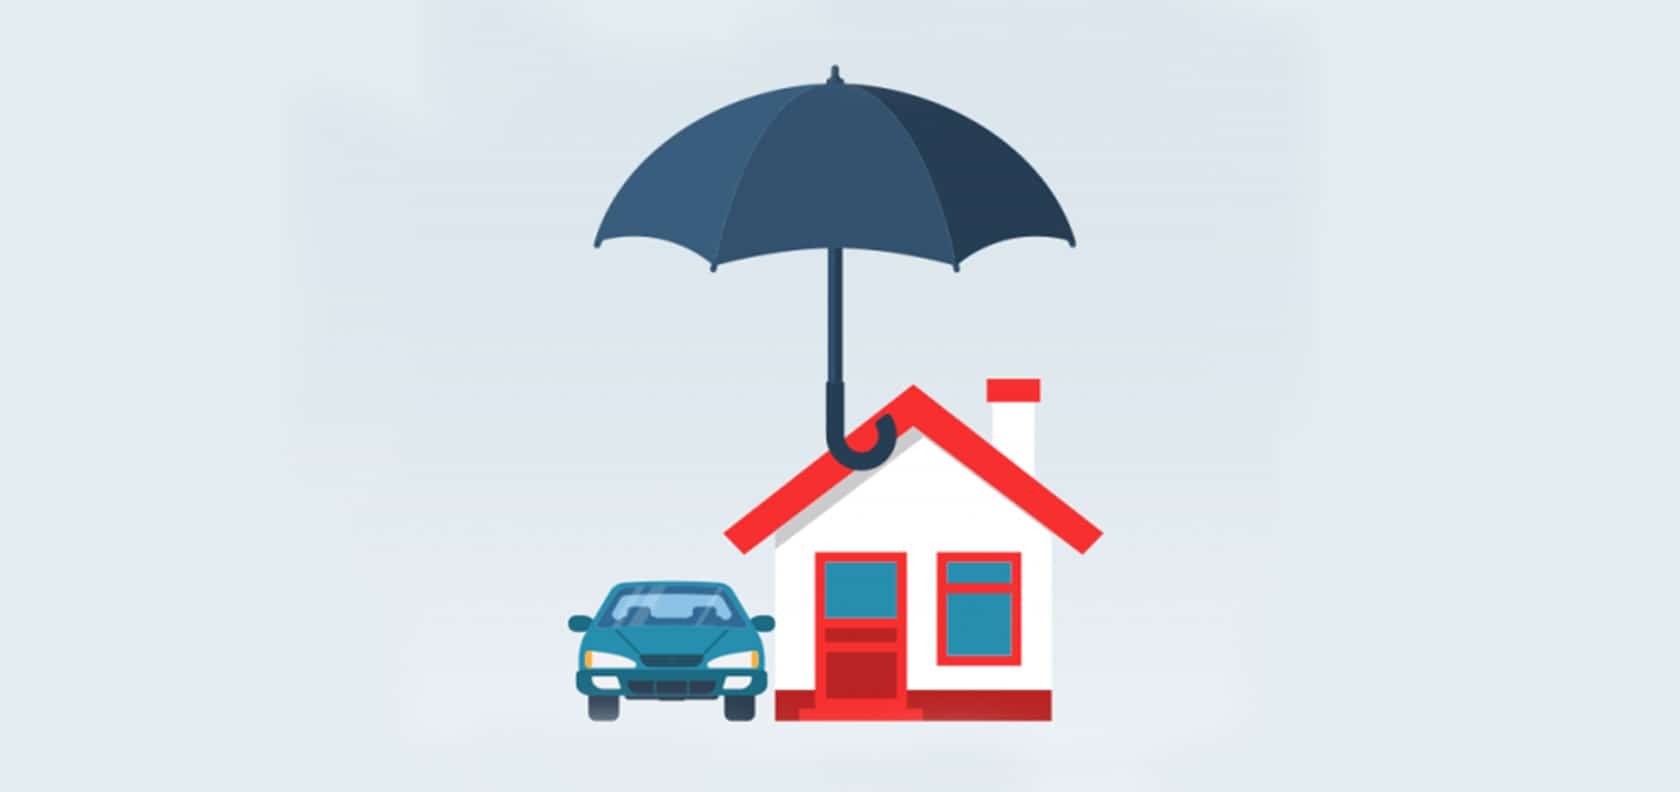 Illustration of a house and a car under an umbrella. Personal Umbrella Policy.